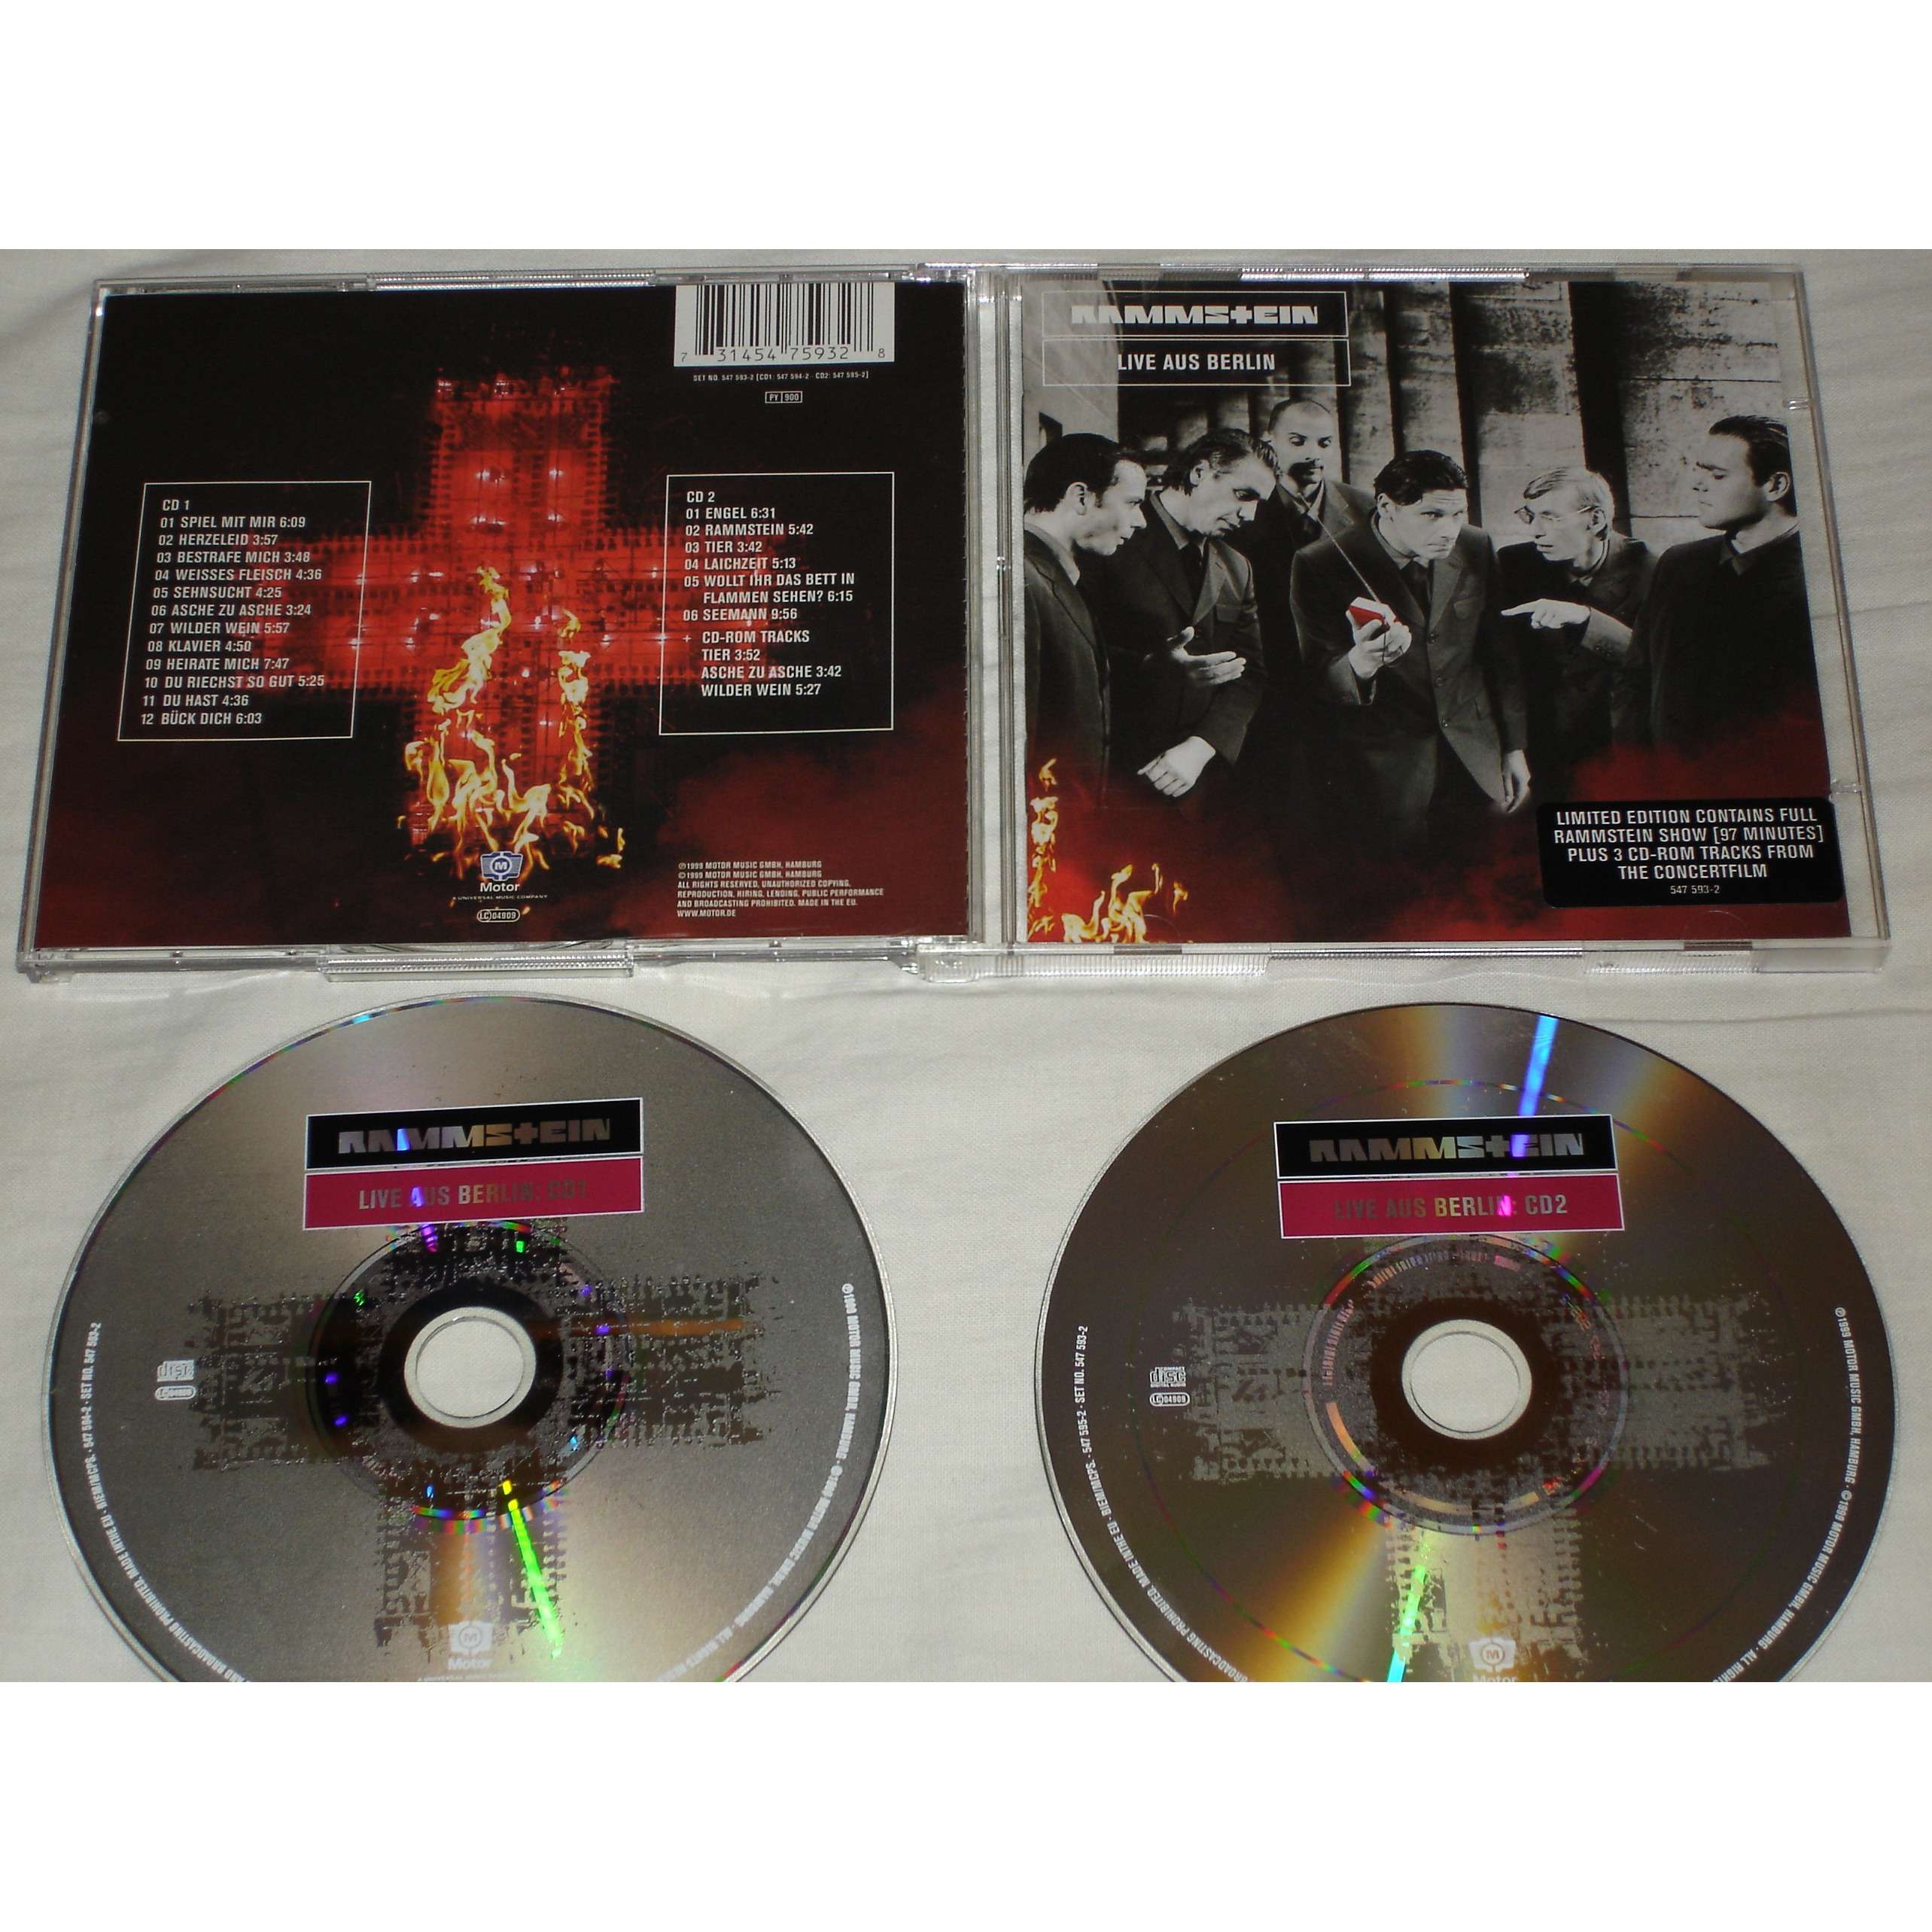 Live aus berlin 2 cd's by Rammstein, CD x 2 with avefenixrecords -  Ref:2300185293